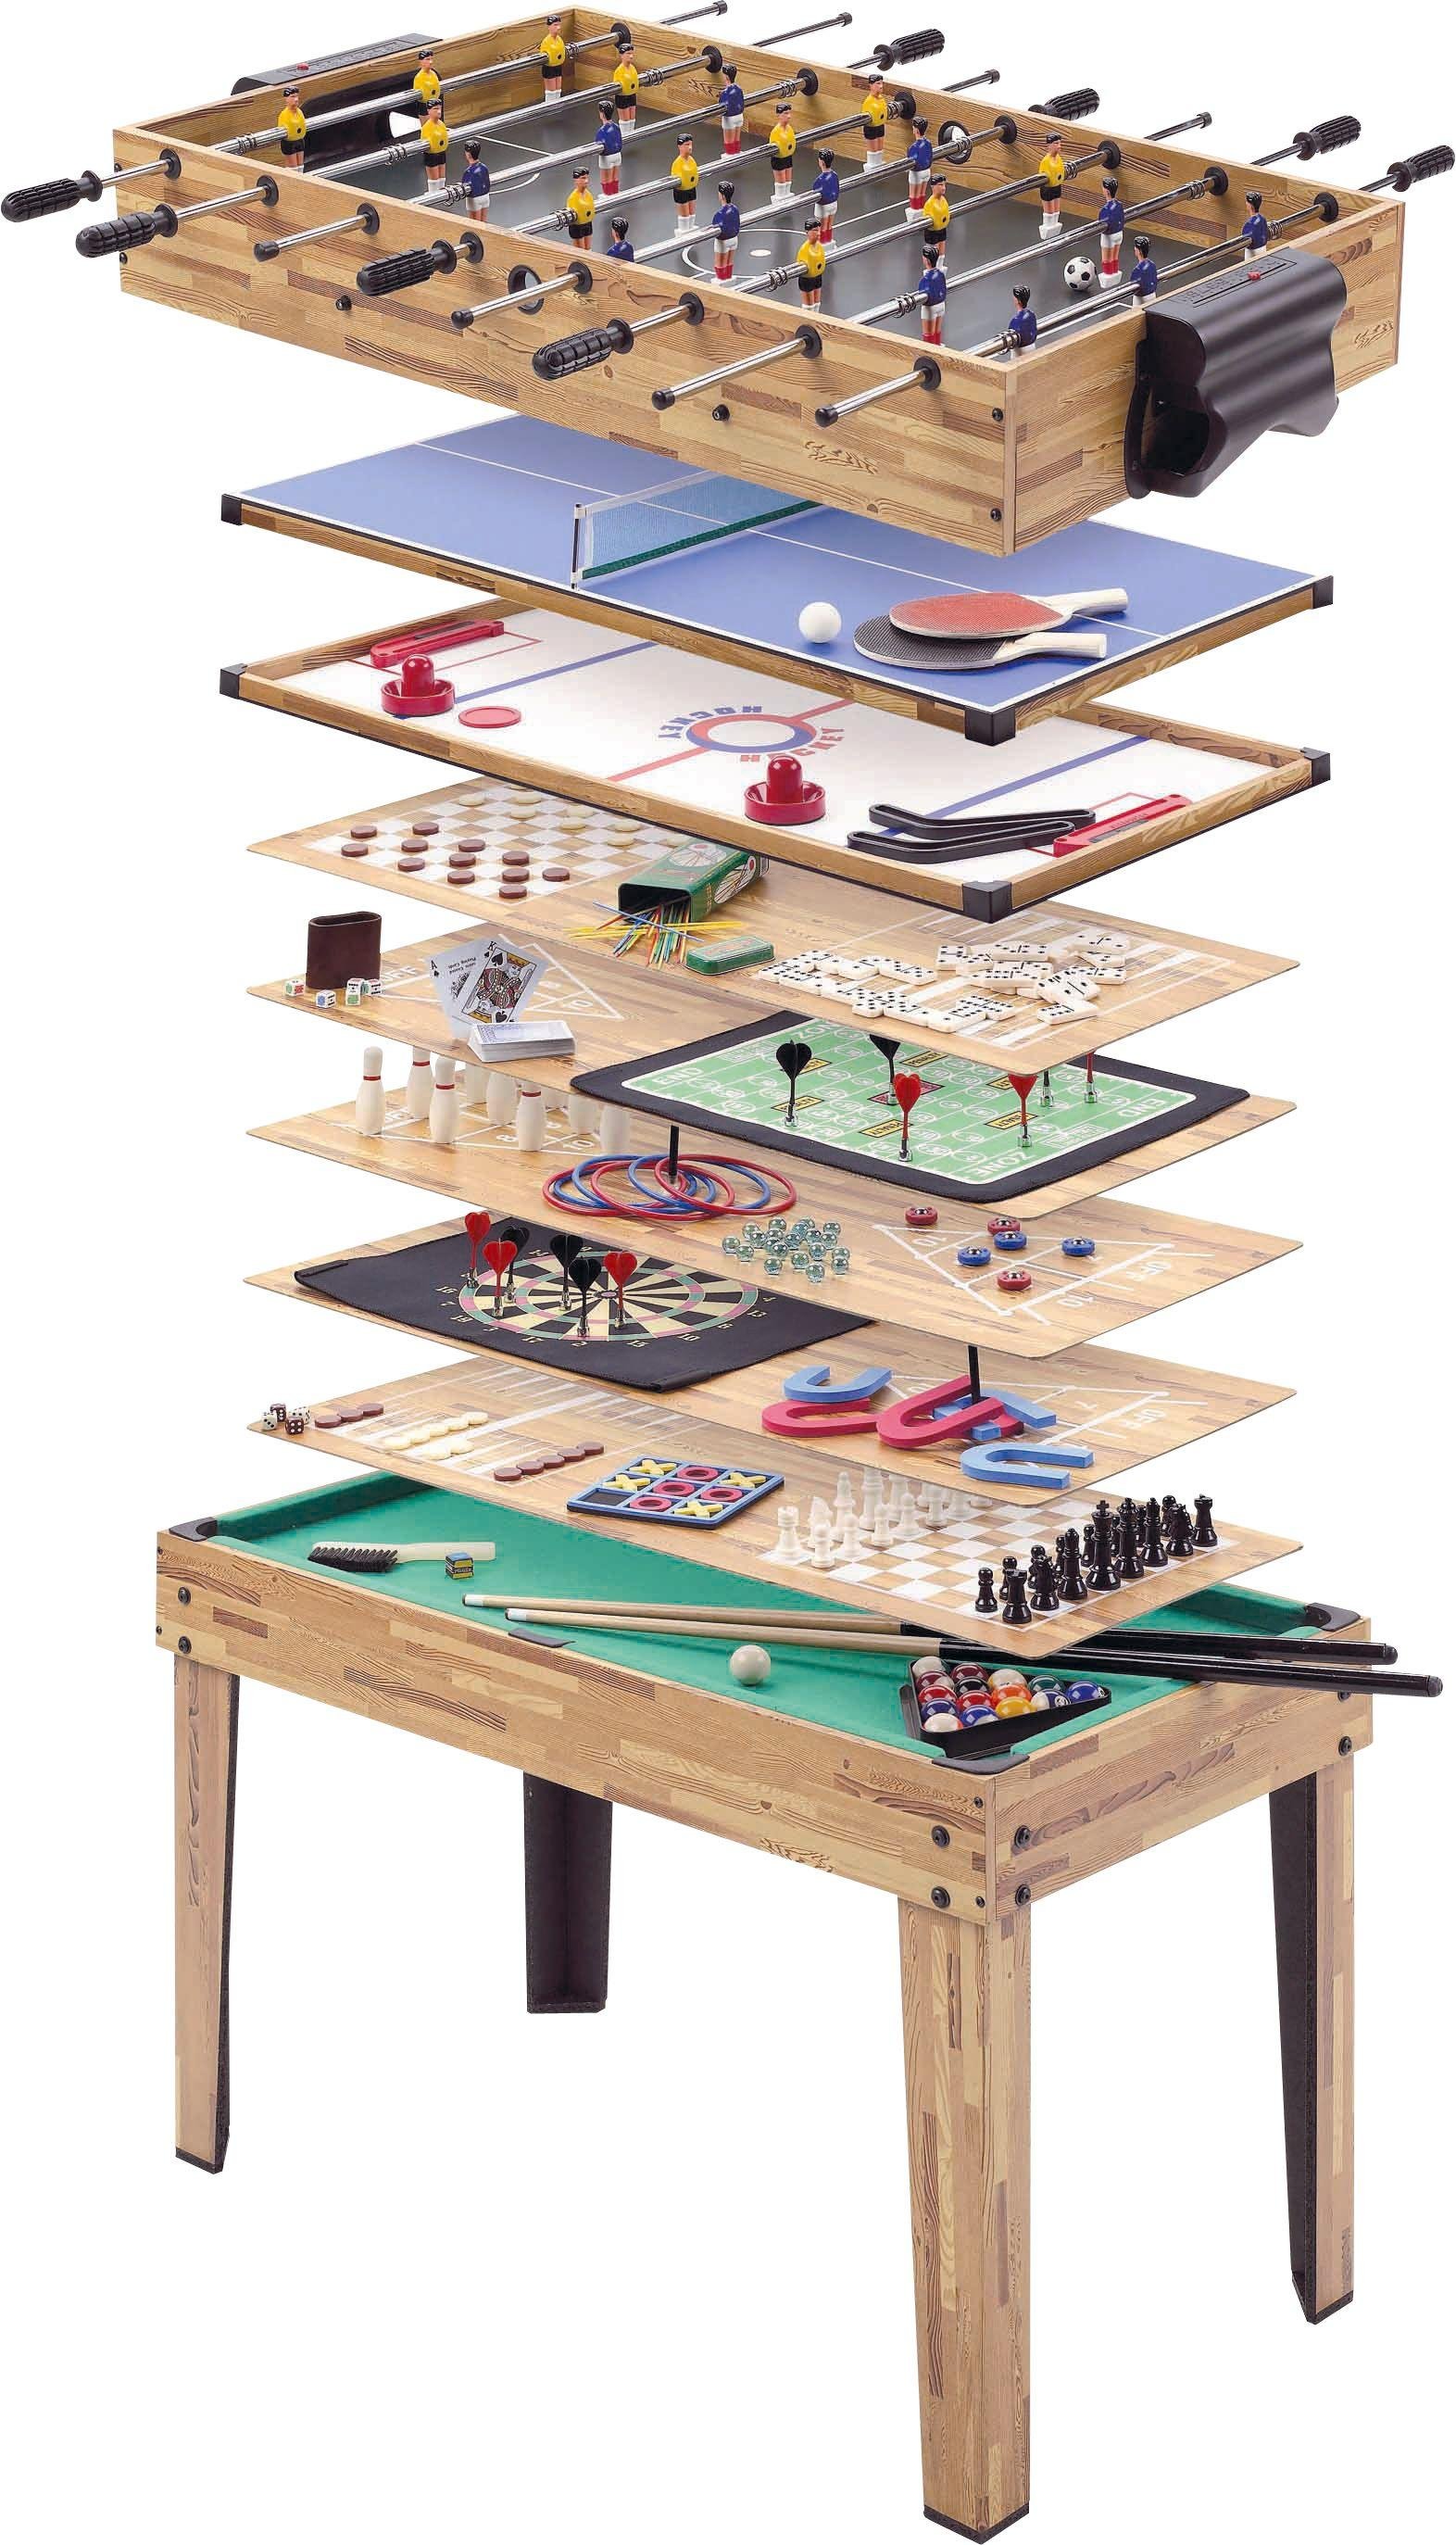 34 in 1 Multiplay Games Table.